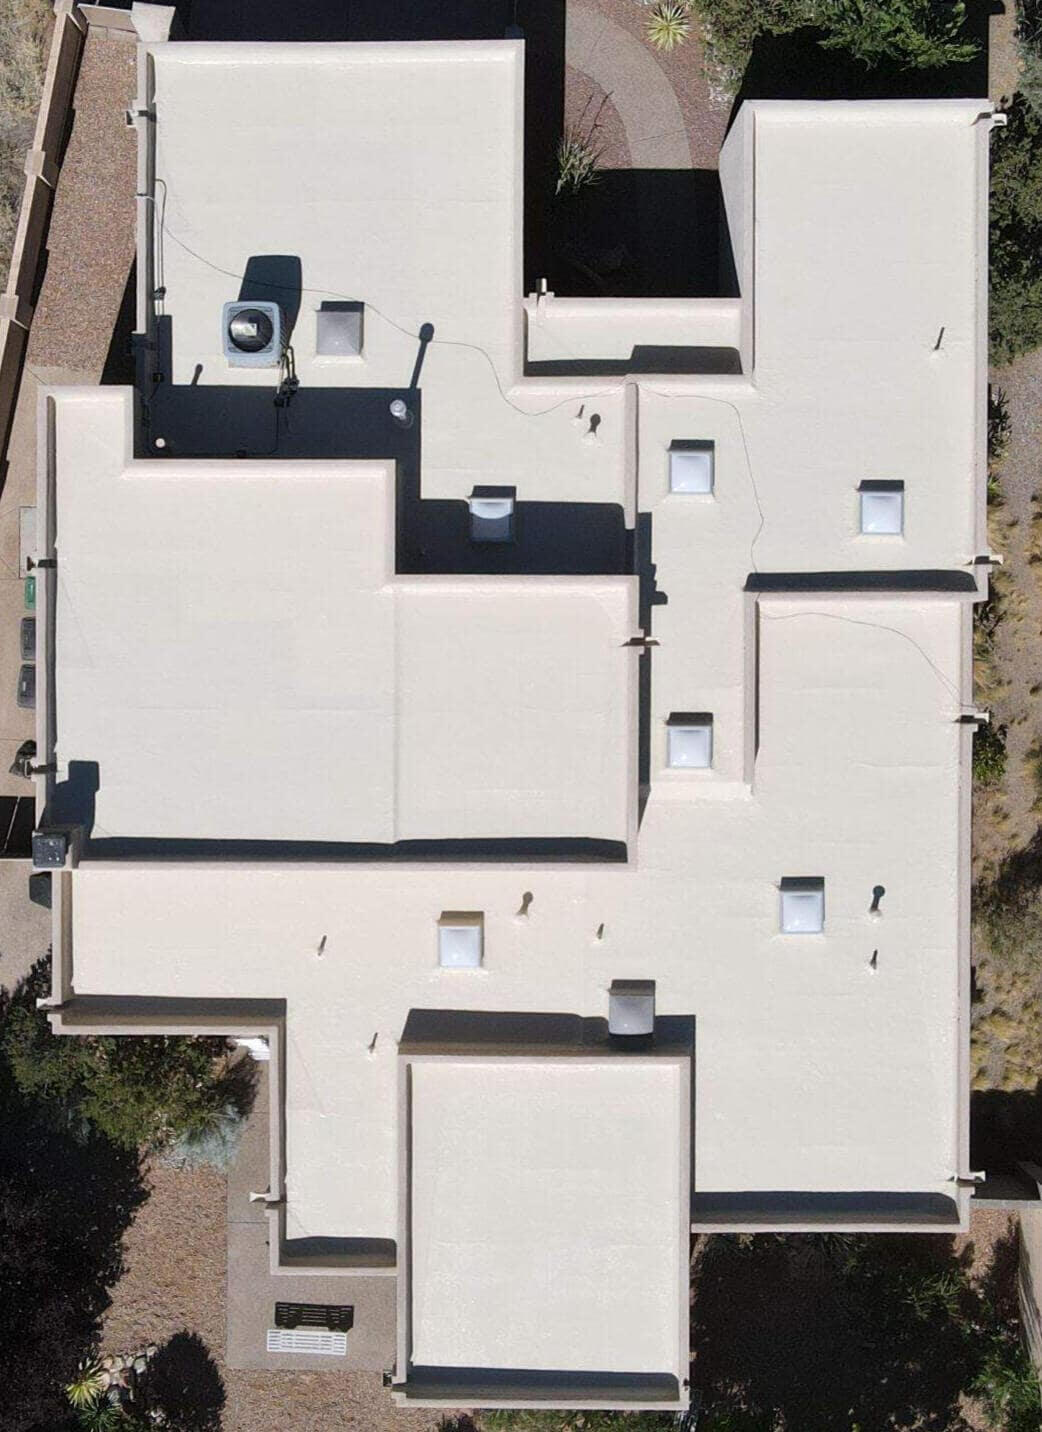 Drone image of a large flat residential roof in Albuquerque, New Mexico, restored with a silicone coating and featuring many skylights.